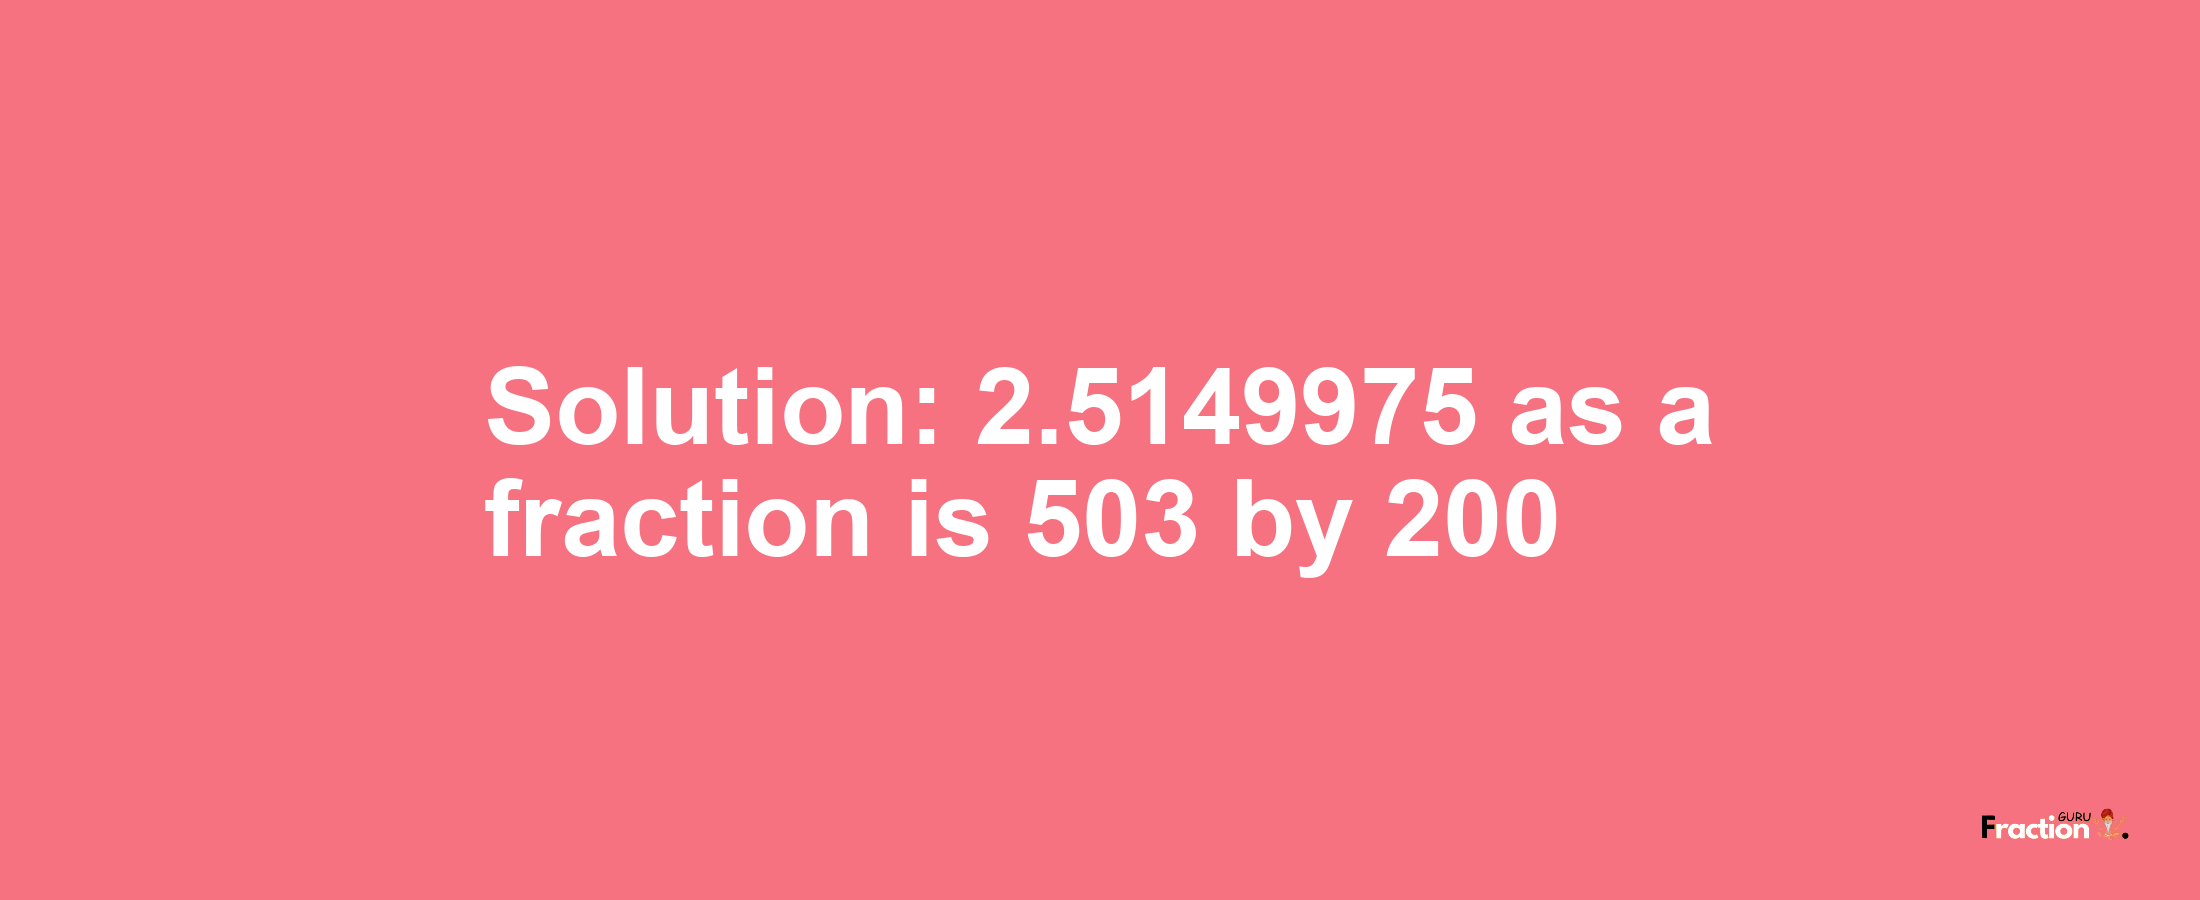 Solution:2.5149975 as a fraction is 503/200